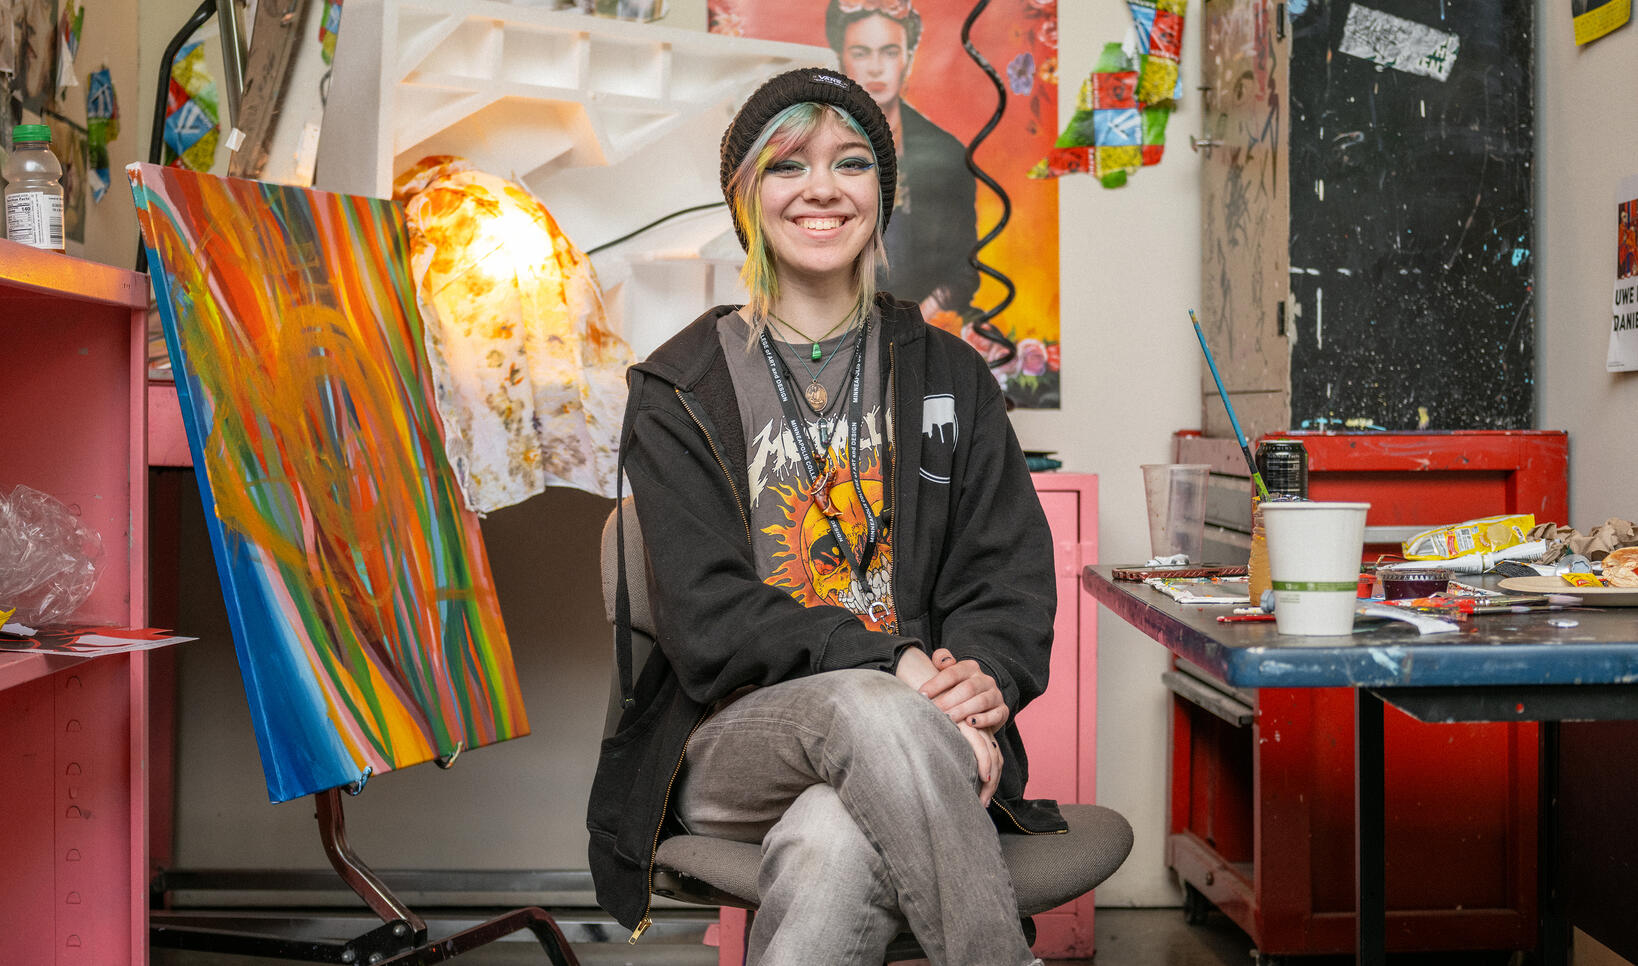 Student sits on a chair facing the camera in a painting studio with several brightly colored paintings and posters on walls.